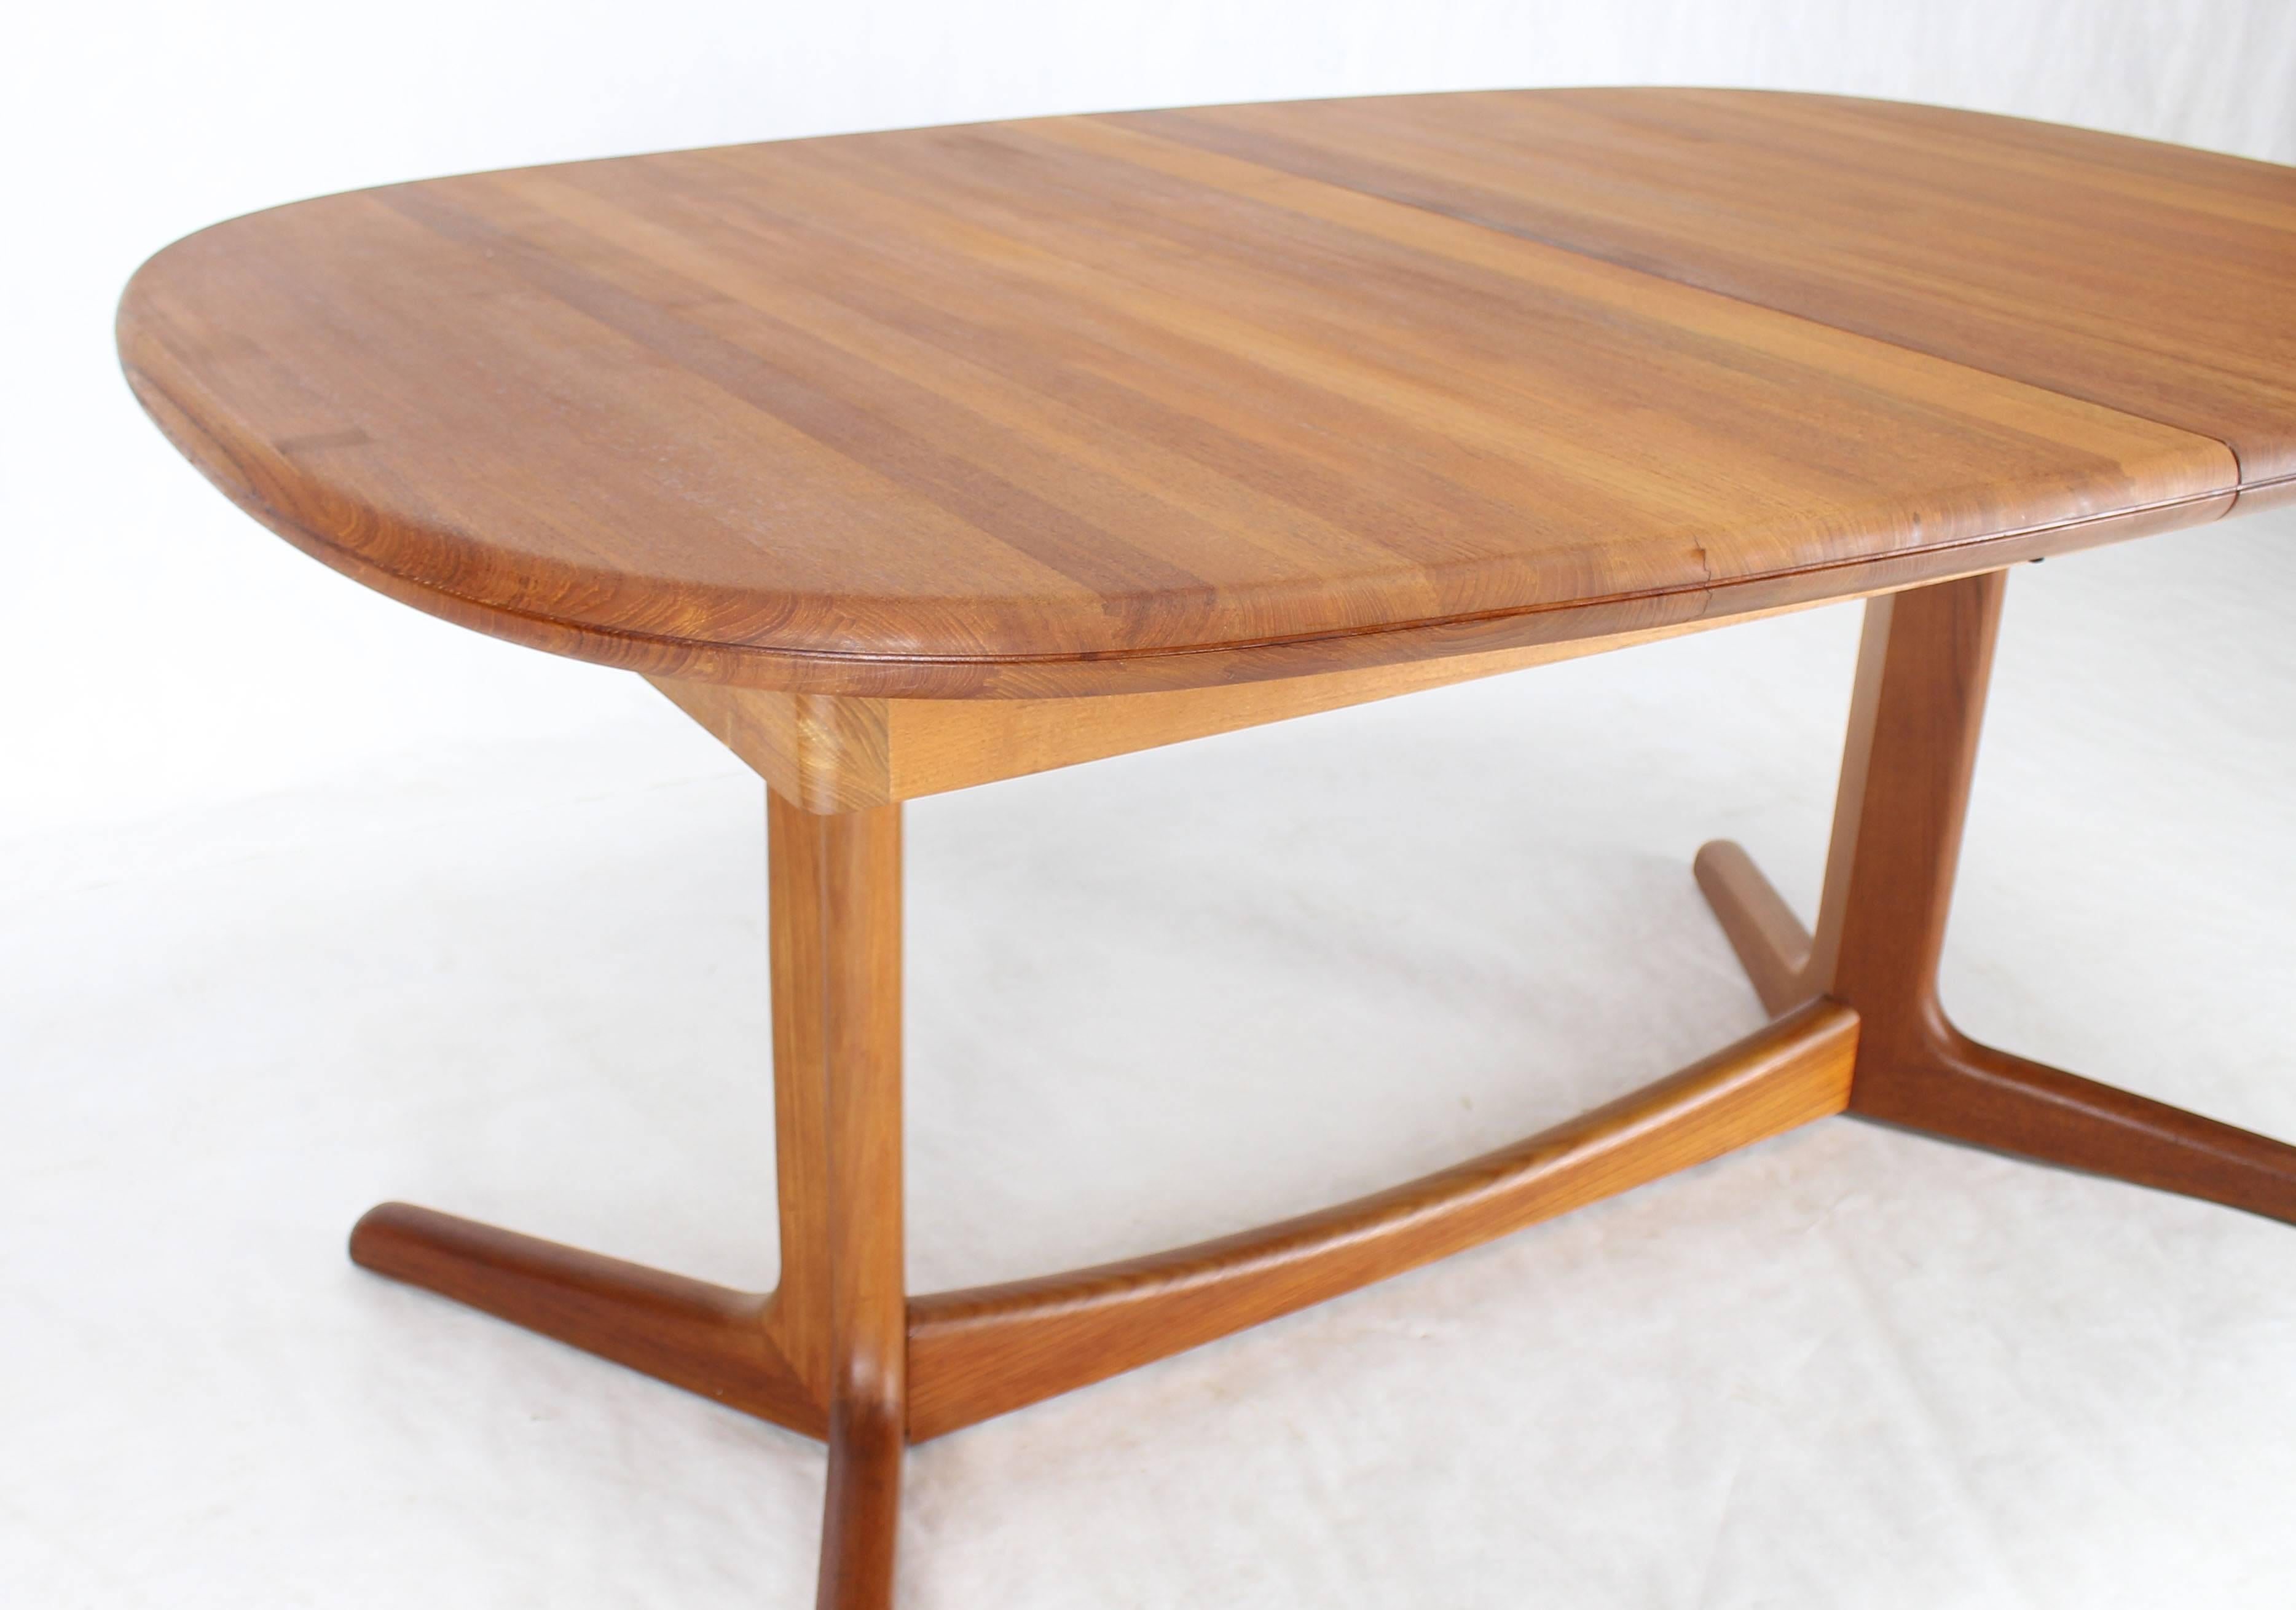 20th Century Solid Teak Danish Mid-Century Modern Dining Table with Two Leafs